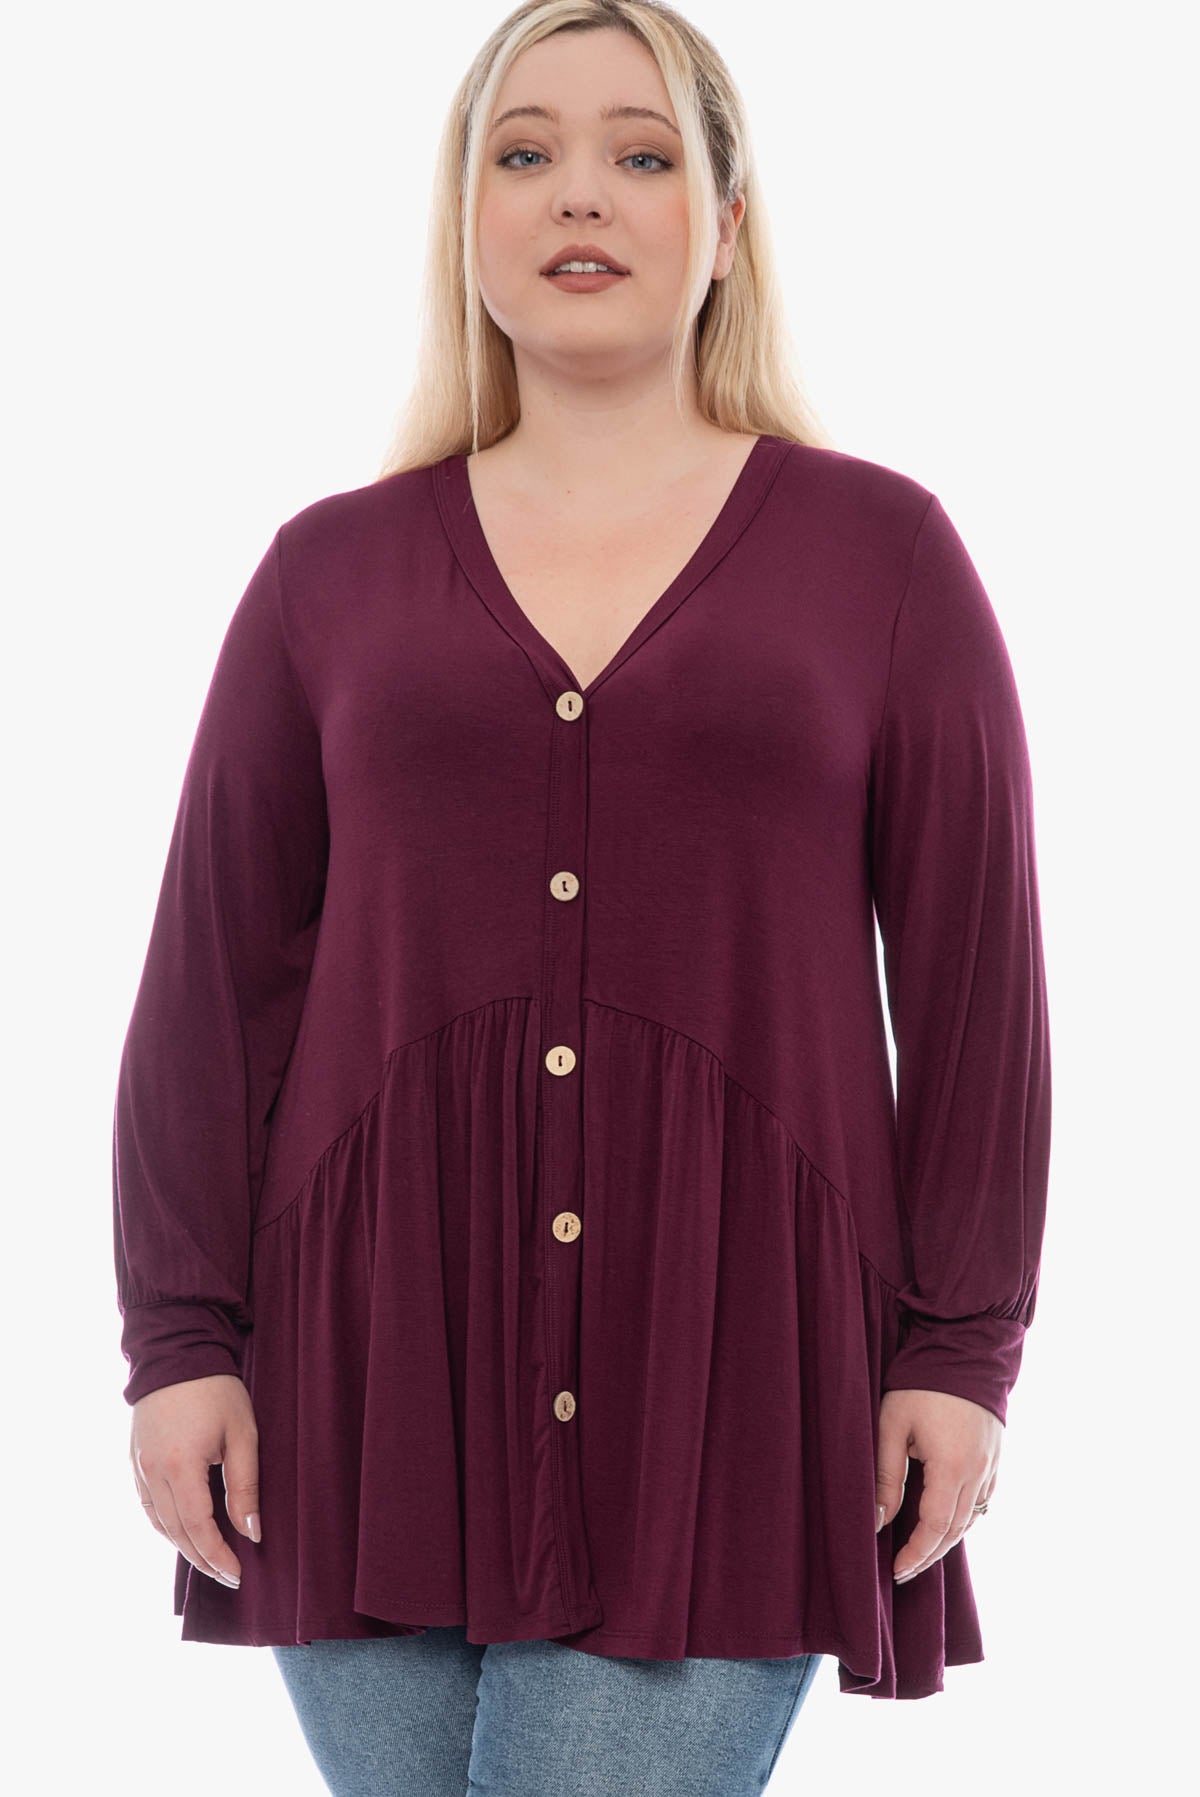 DARBY comfy long tunic